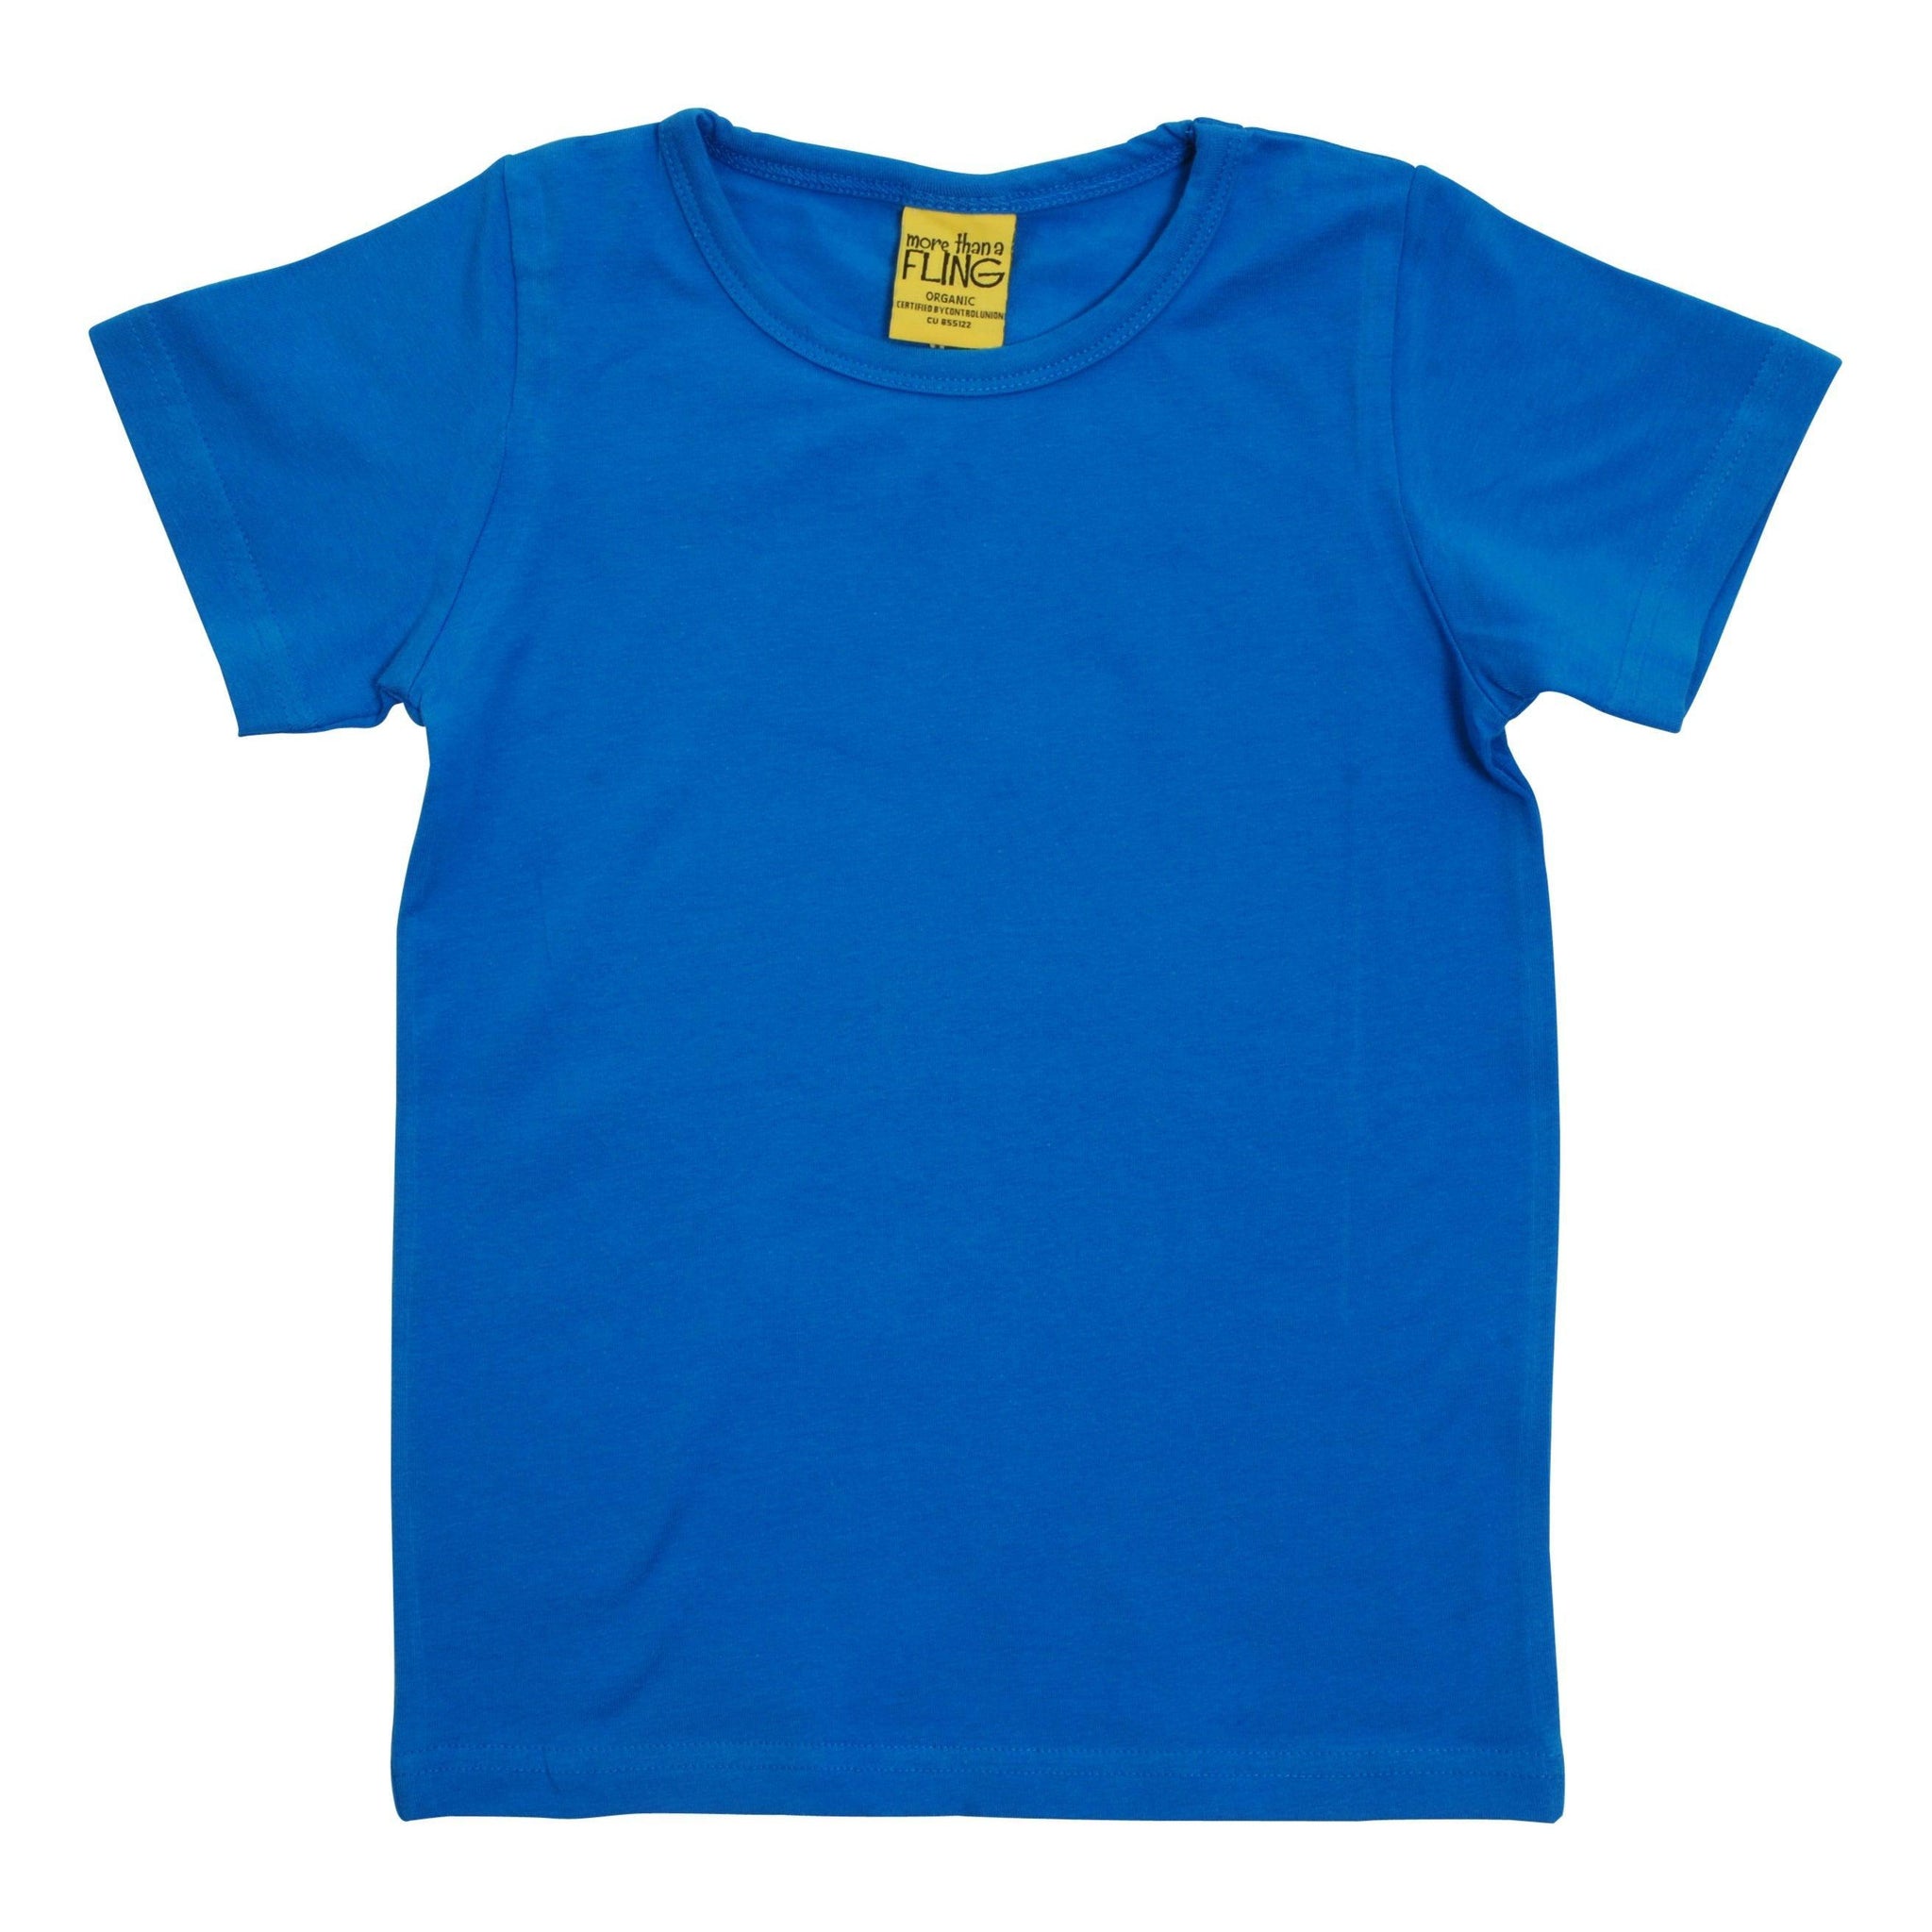 More than a FLING - Blue Aster Short Sleeved Top